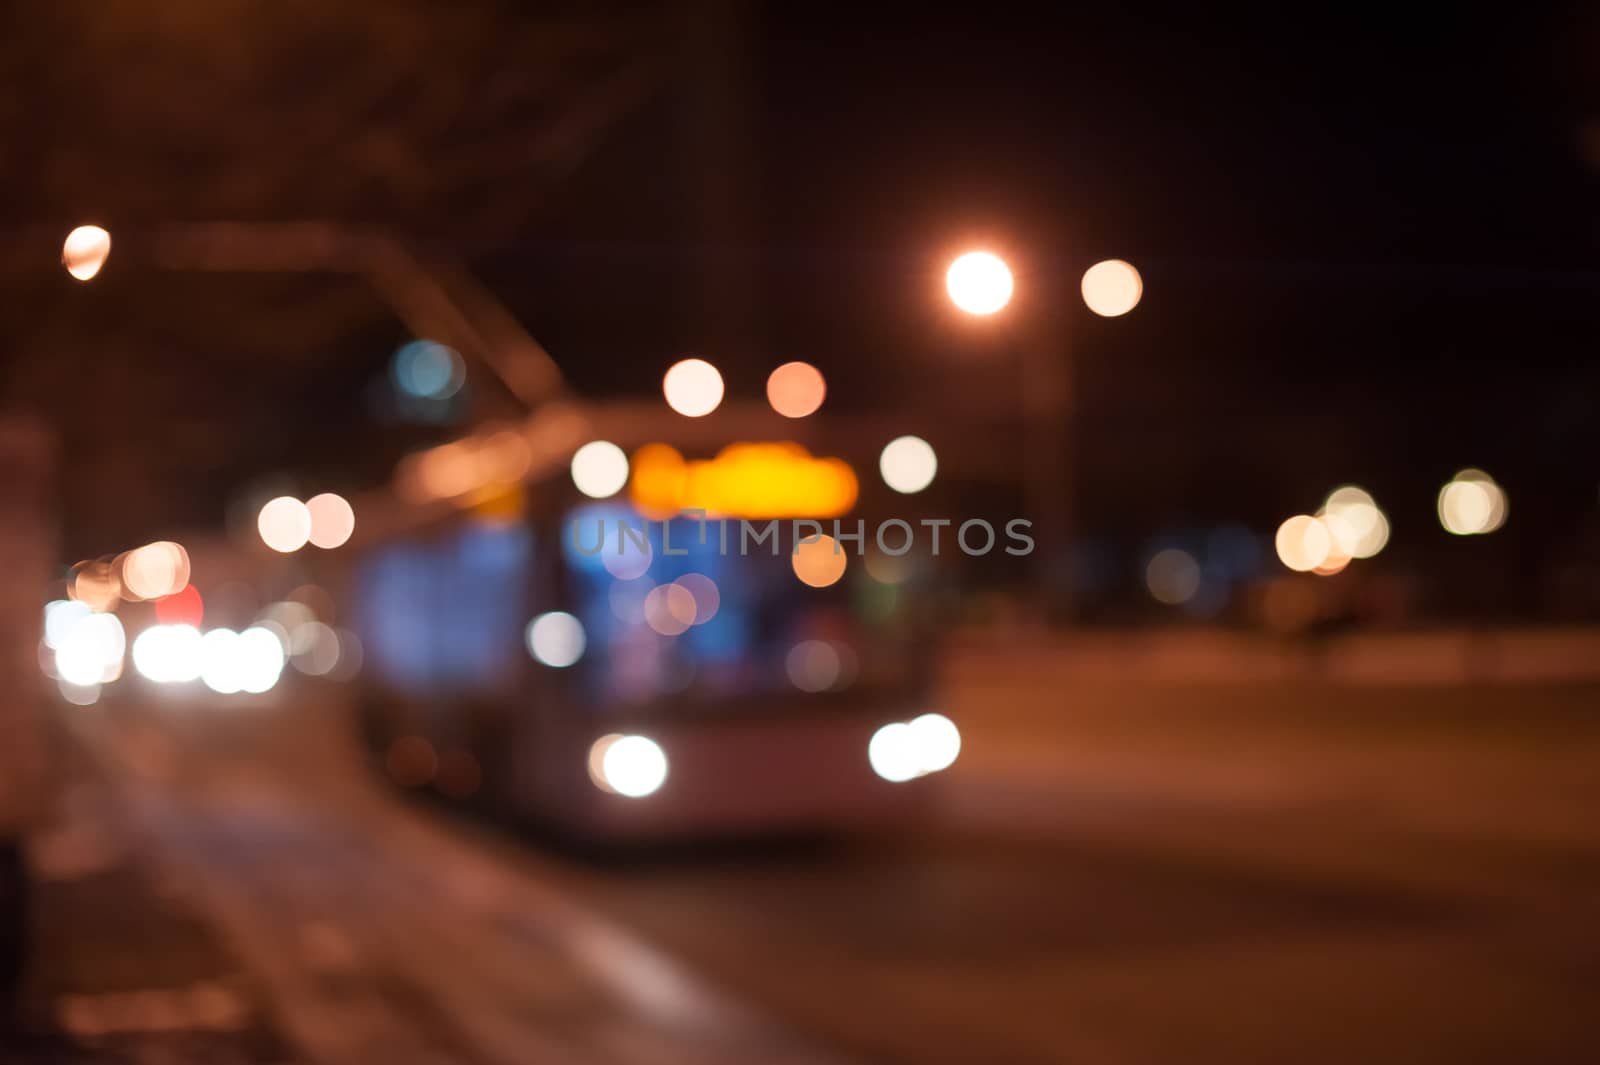 trolley bus on the night city street.